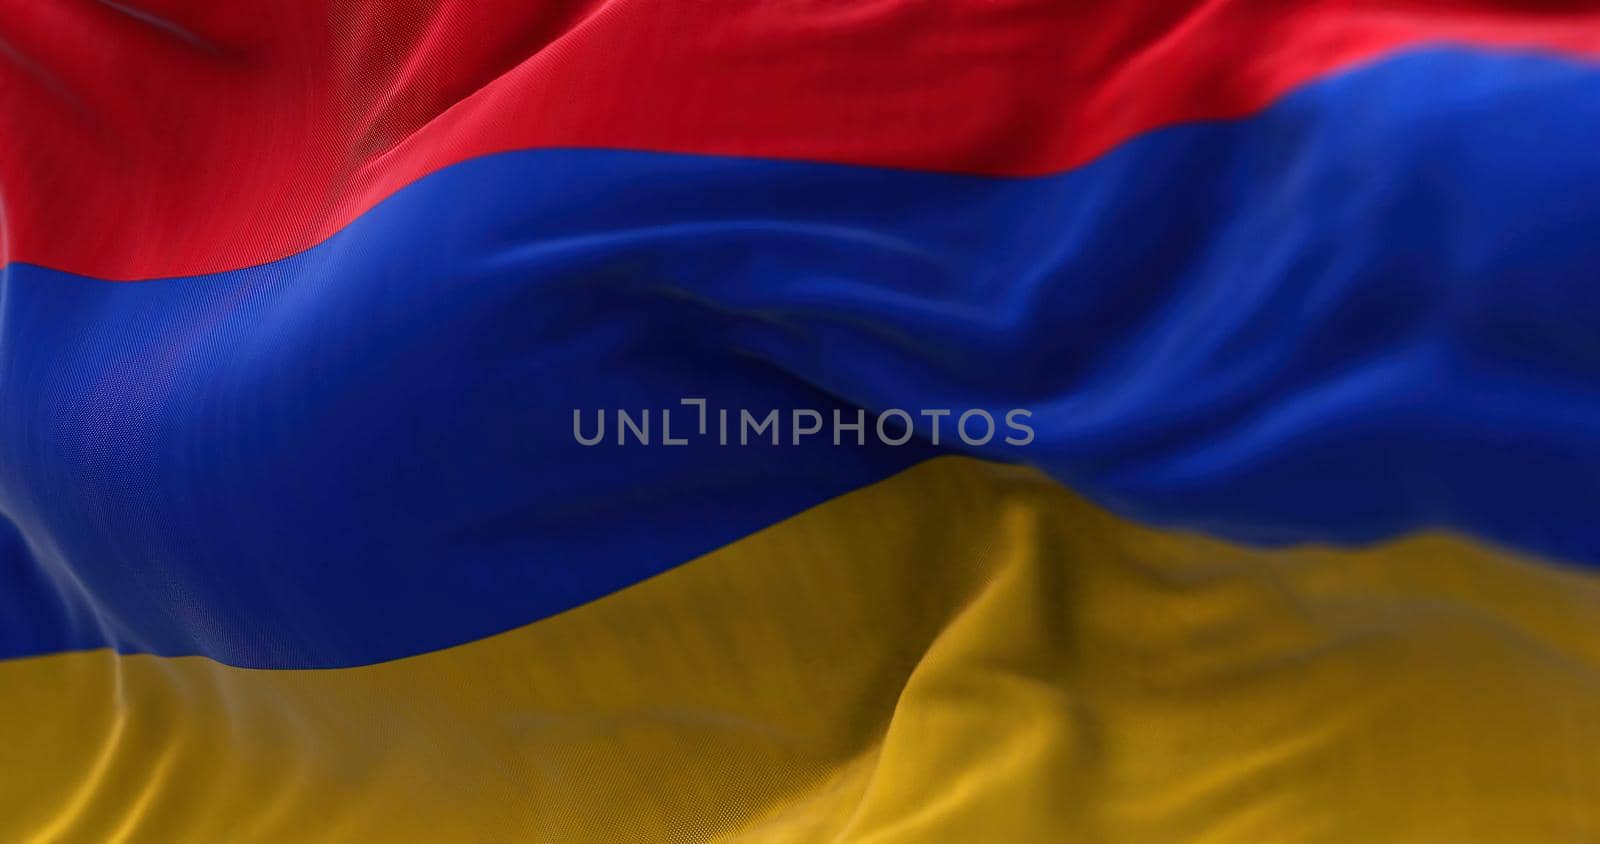 Close-up view of the armenian national flag waving in the wind. Armenia is a landlocked country located in the Armenian Highlands of Western Asia. Fabric textured background. Selective focus